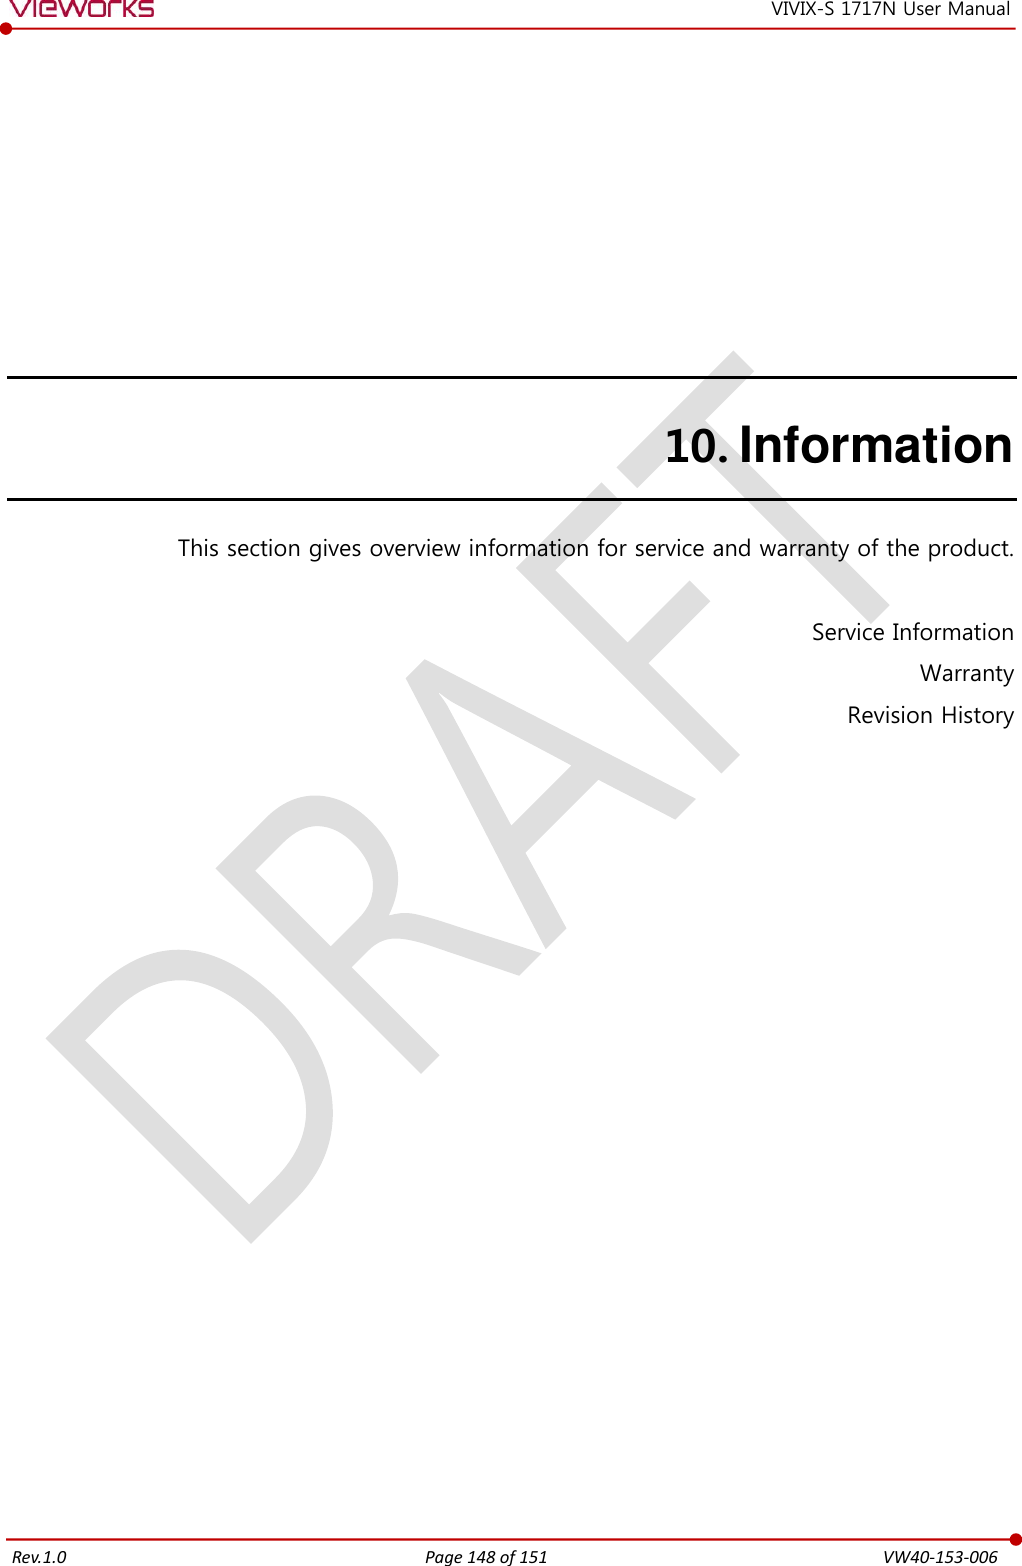   Rev.1.0 Page 148 of 151  VW40-153-006 VIVIX-S 1717N User Manual 10. Information This section gives overview information for service and warranty of the product.  Service Information Warranty Revision History        